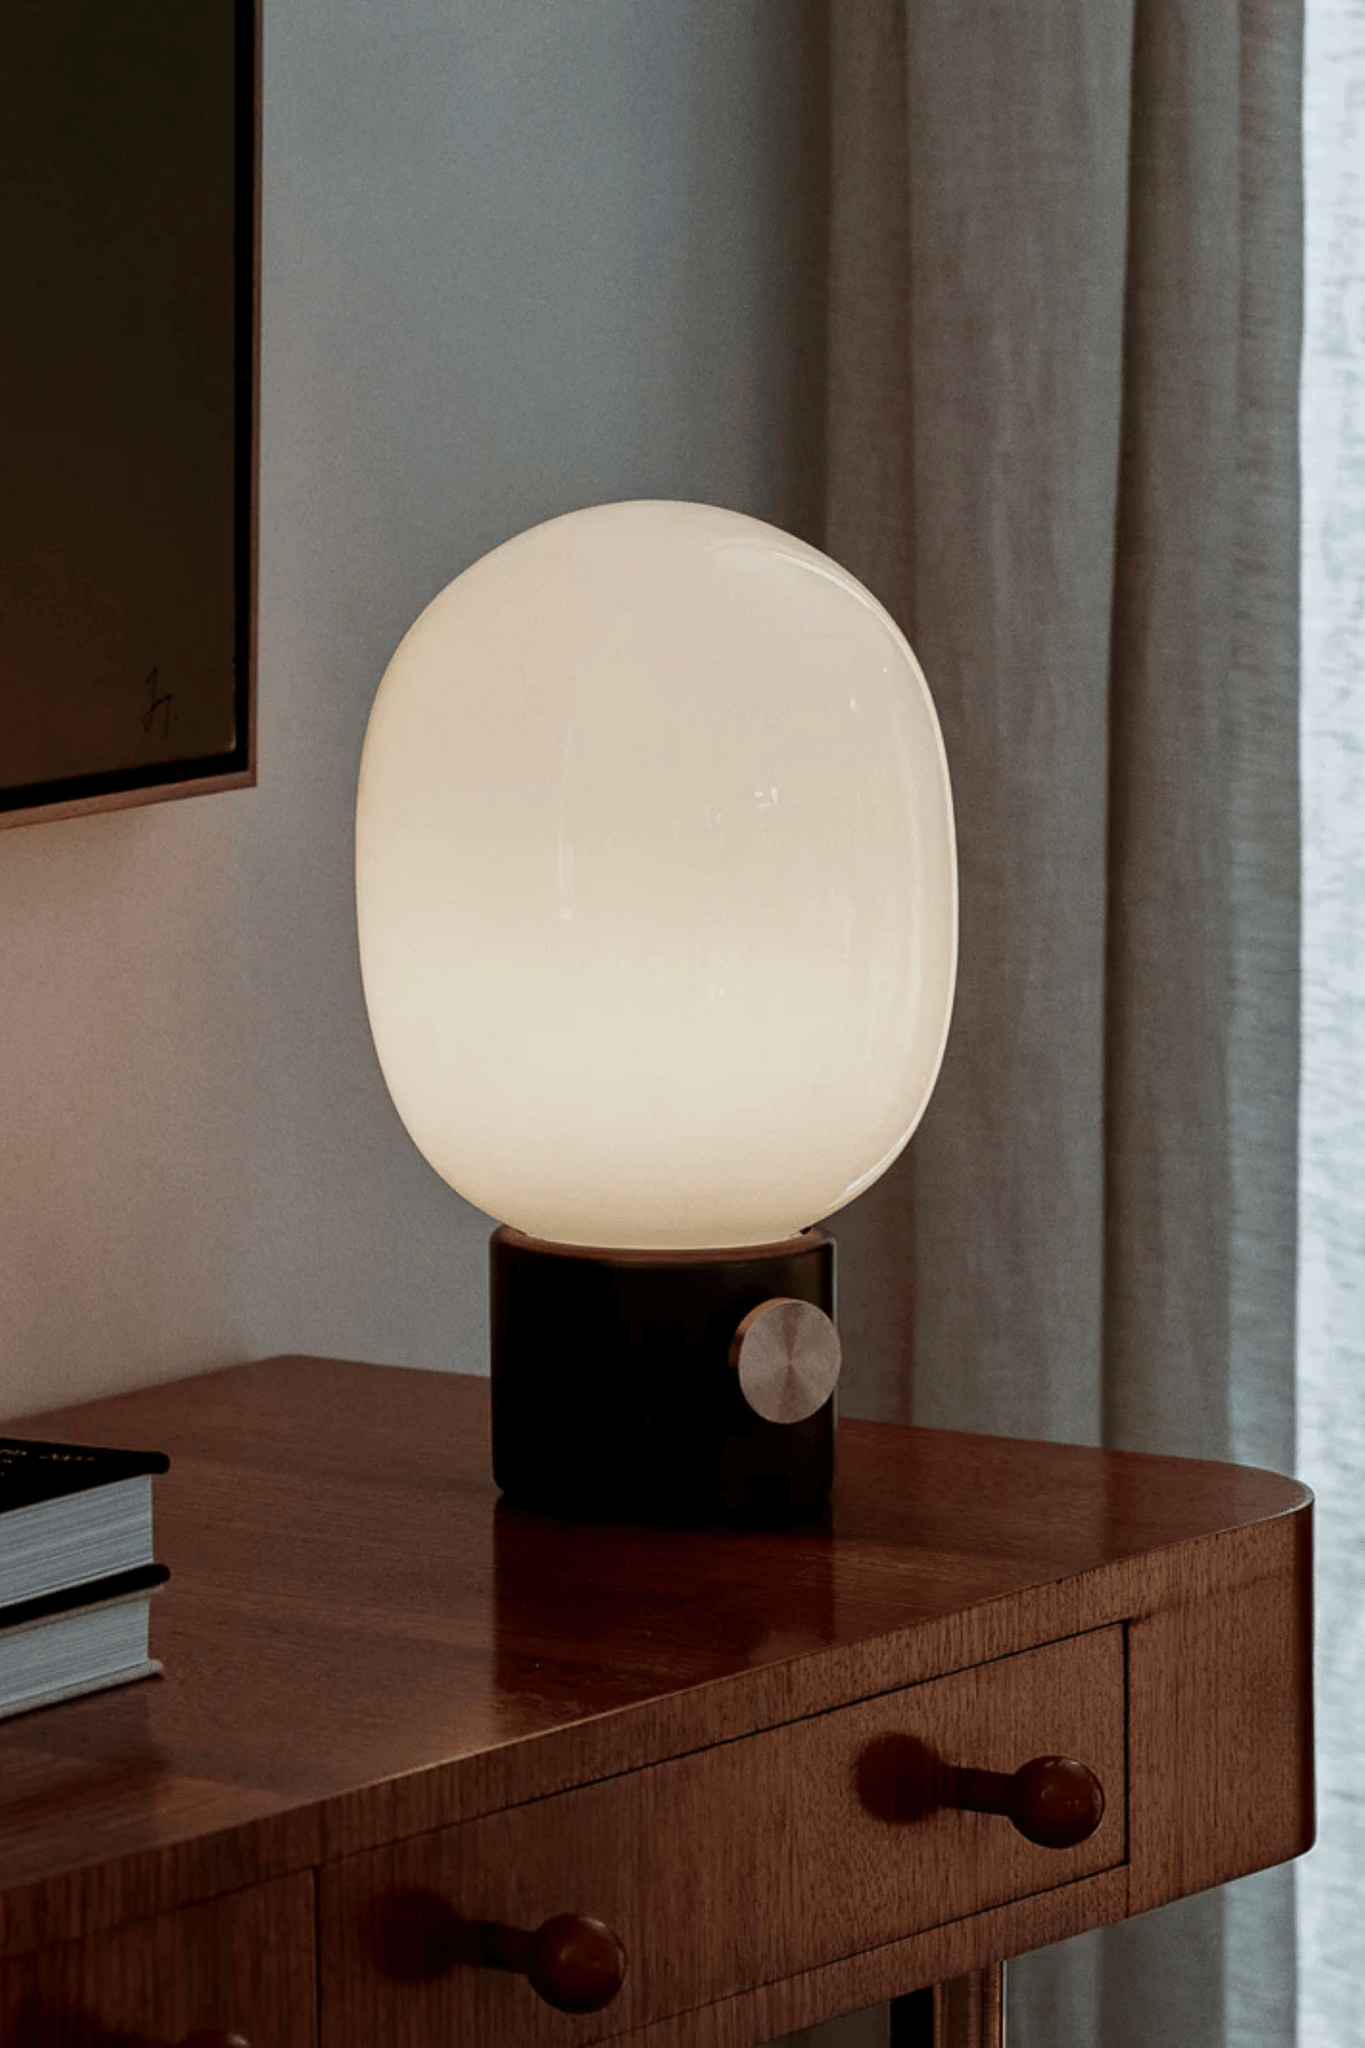 Black Marble JWDA Table Lamp by Menu, shown lit on a table